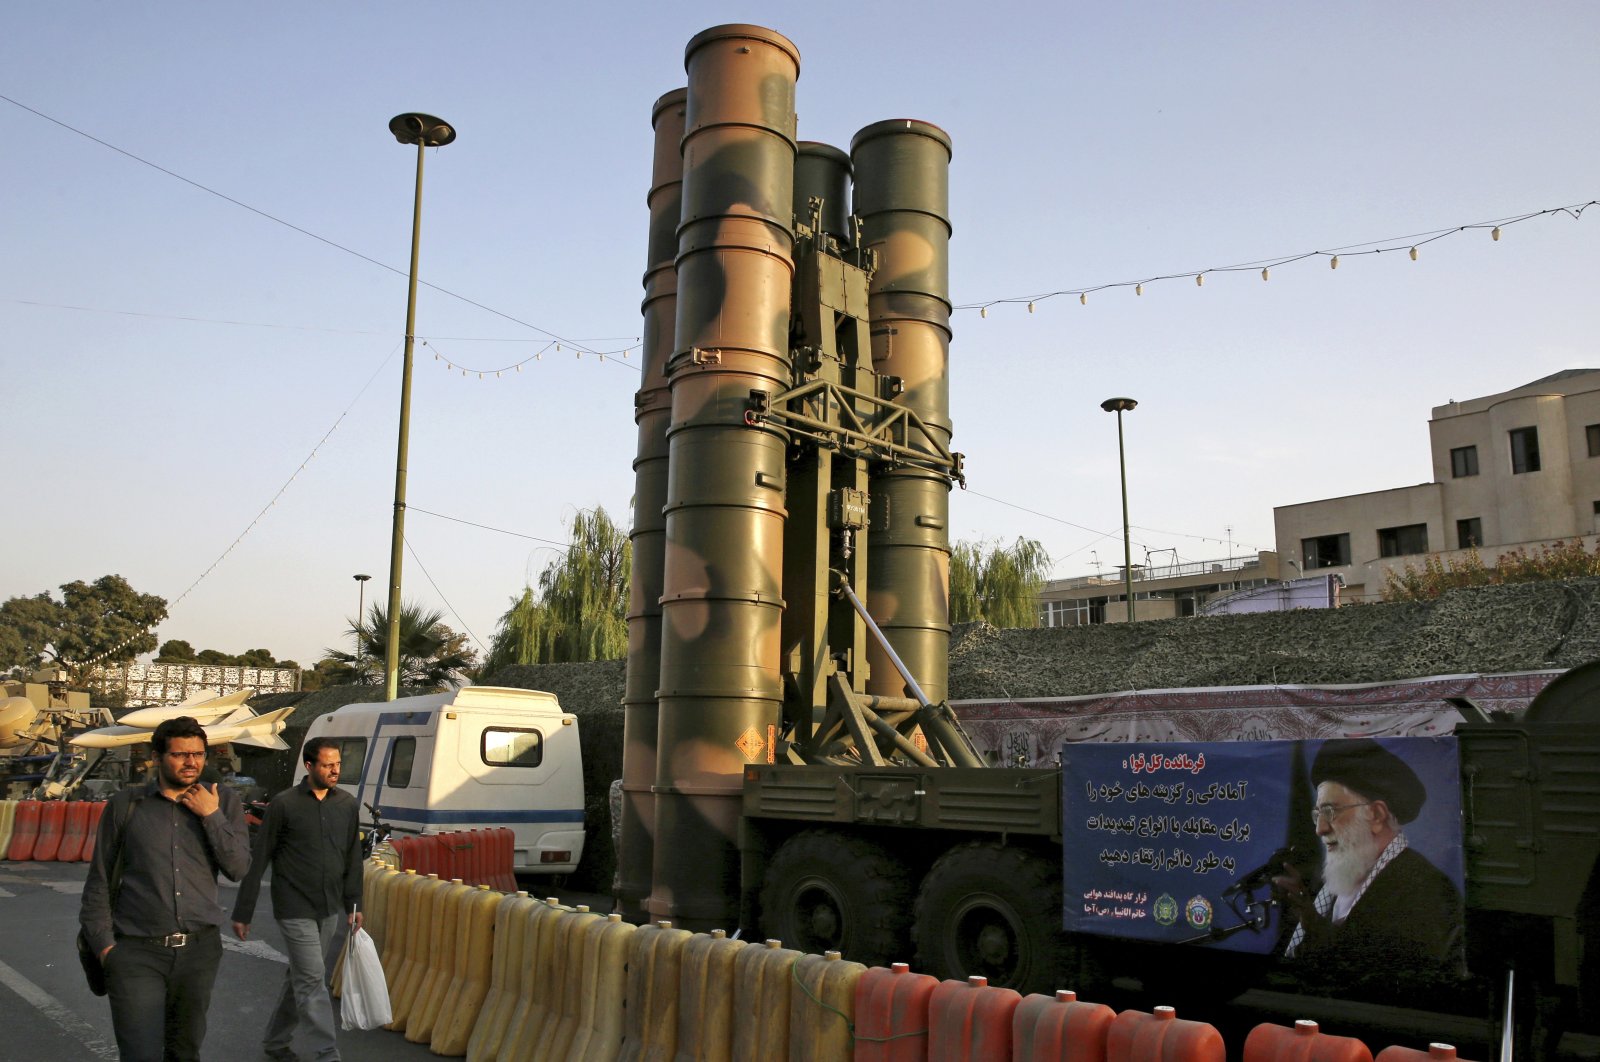 A Russian-made S-300 air defense system sits on display for the annual Defense Week, marking the 37th anniversary of the 1980s Iran-Iraq war, Baharestan Square, Tehran, Iran, Sept. 24, 2017. (AP File Photo)